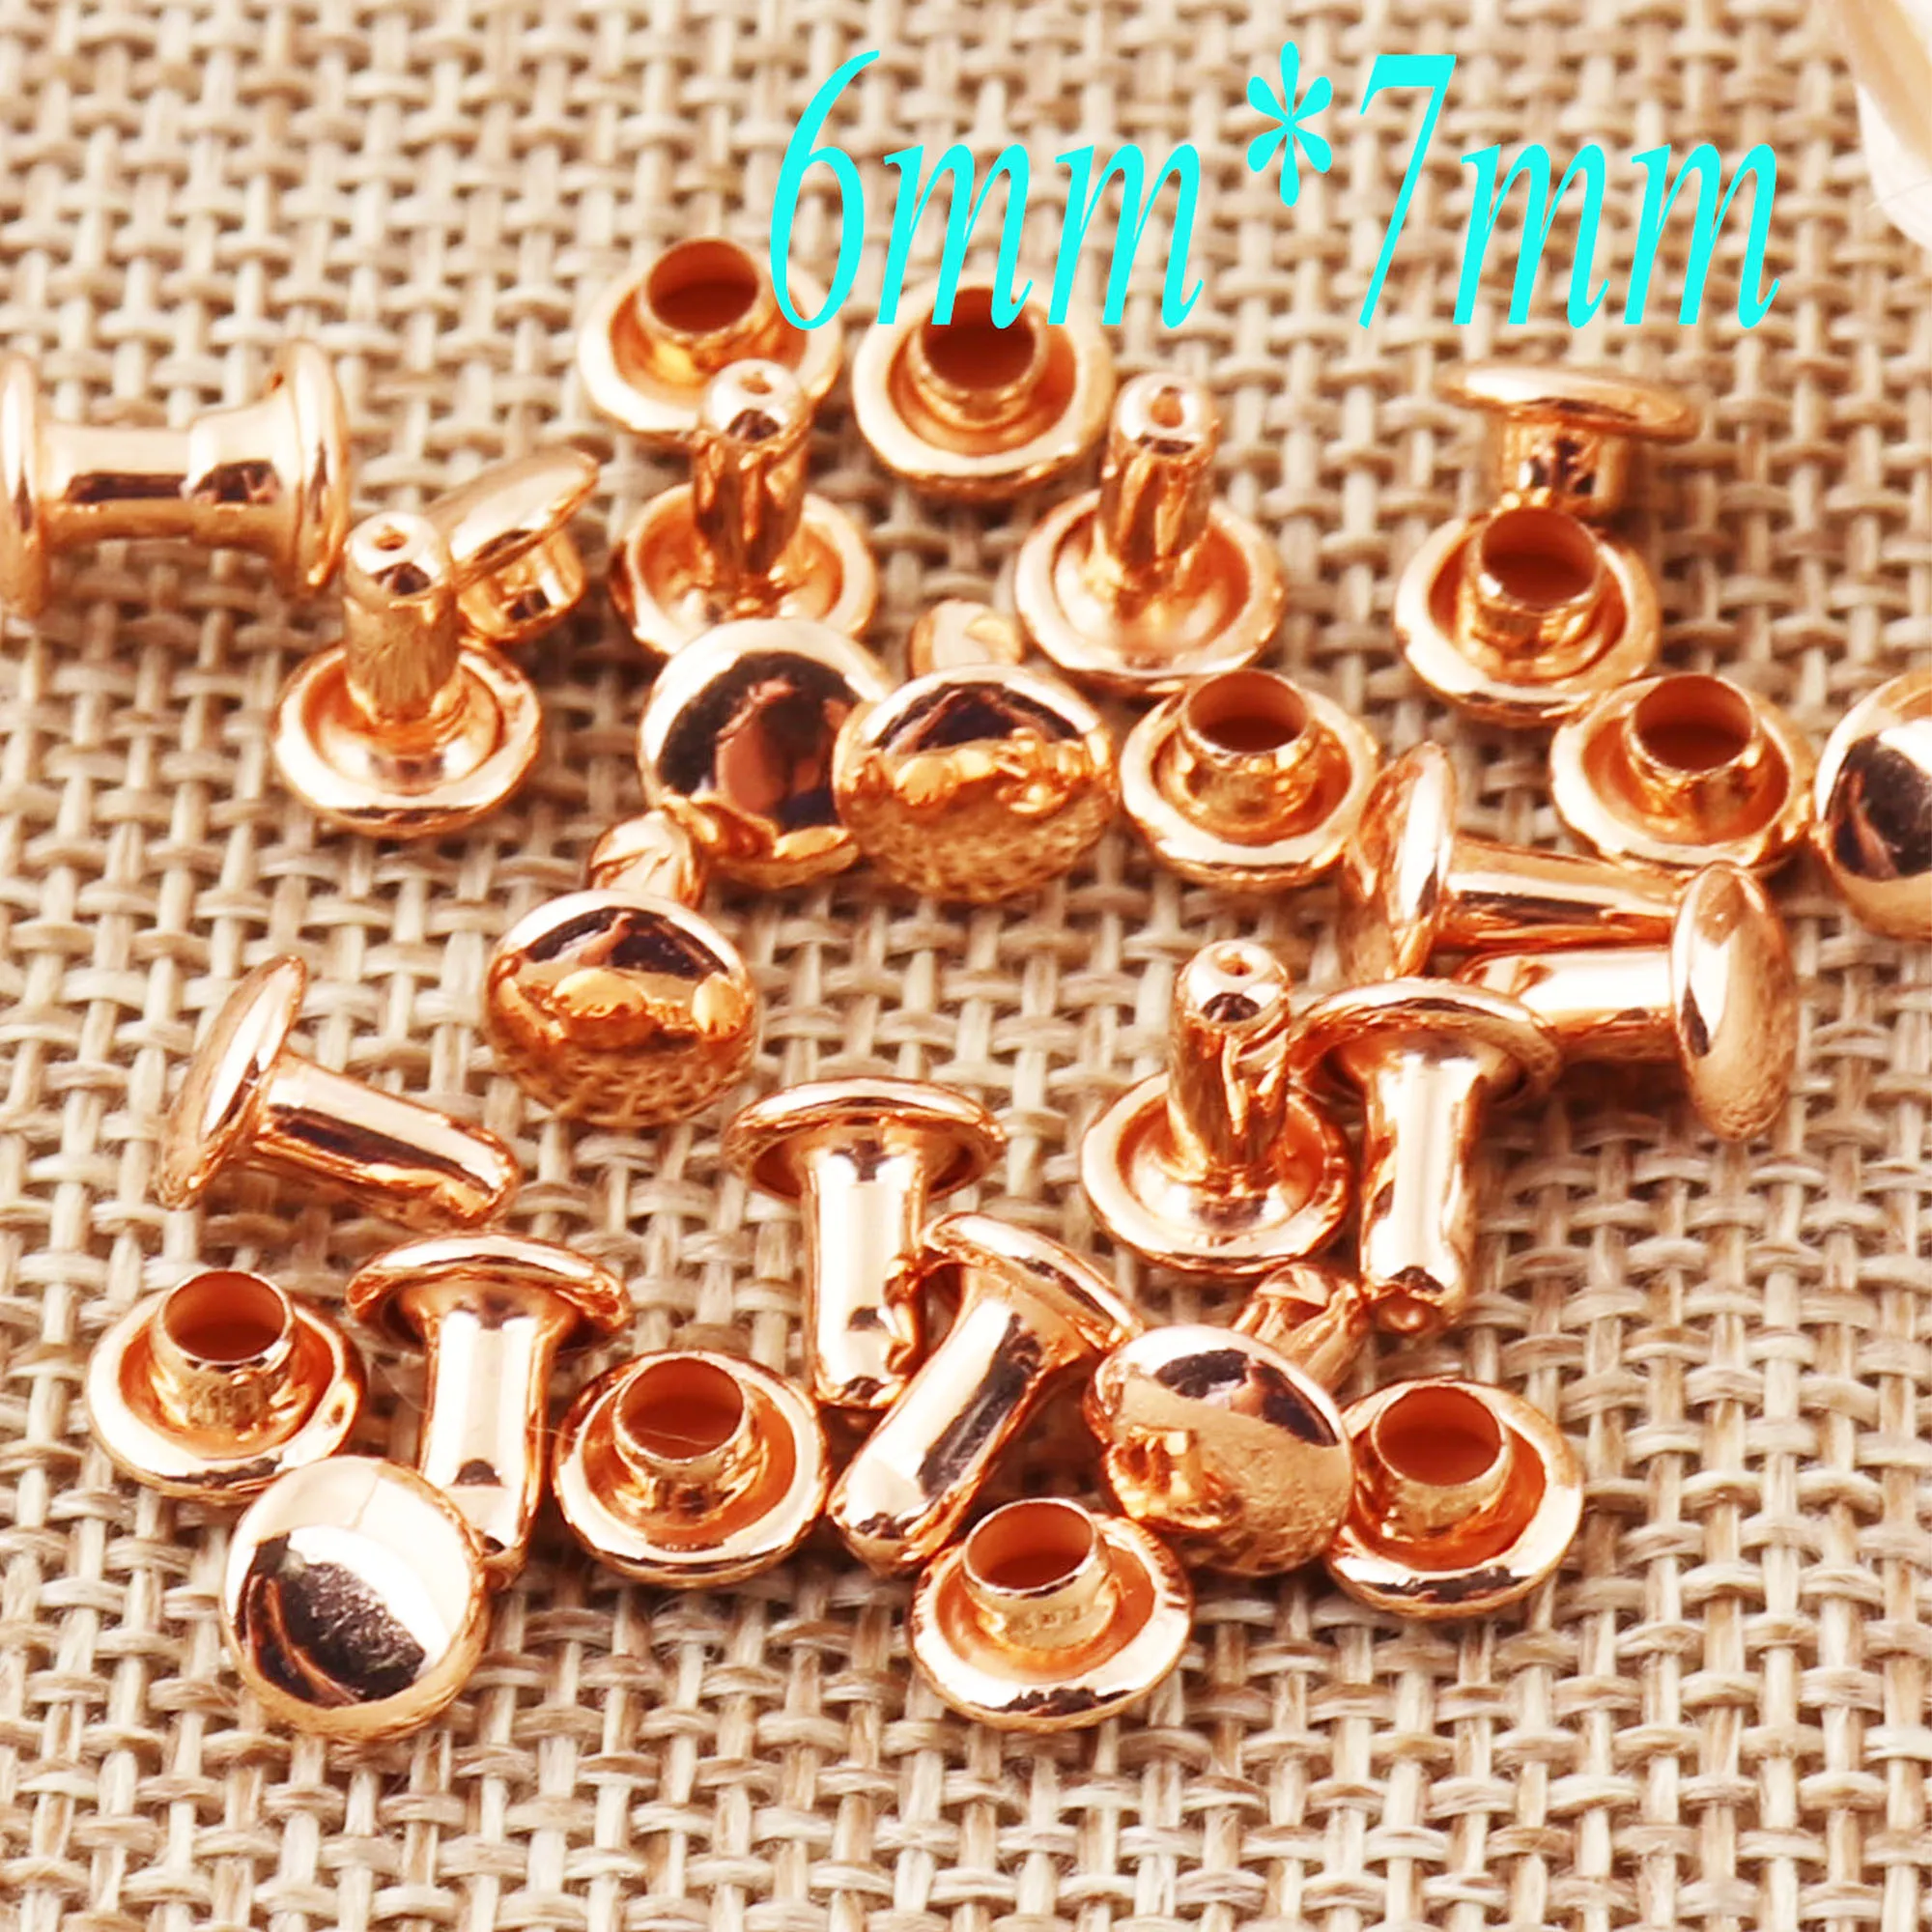 

100-300 Sets MINI Rose Gold Double Cap Rivets Round 6mm Studs Leather Craft Snaps Prong Fastener Riveted